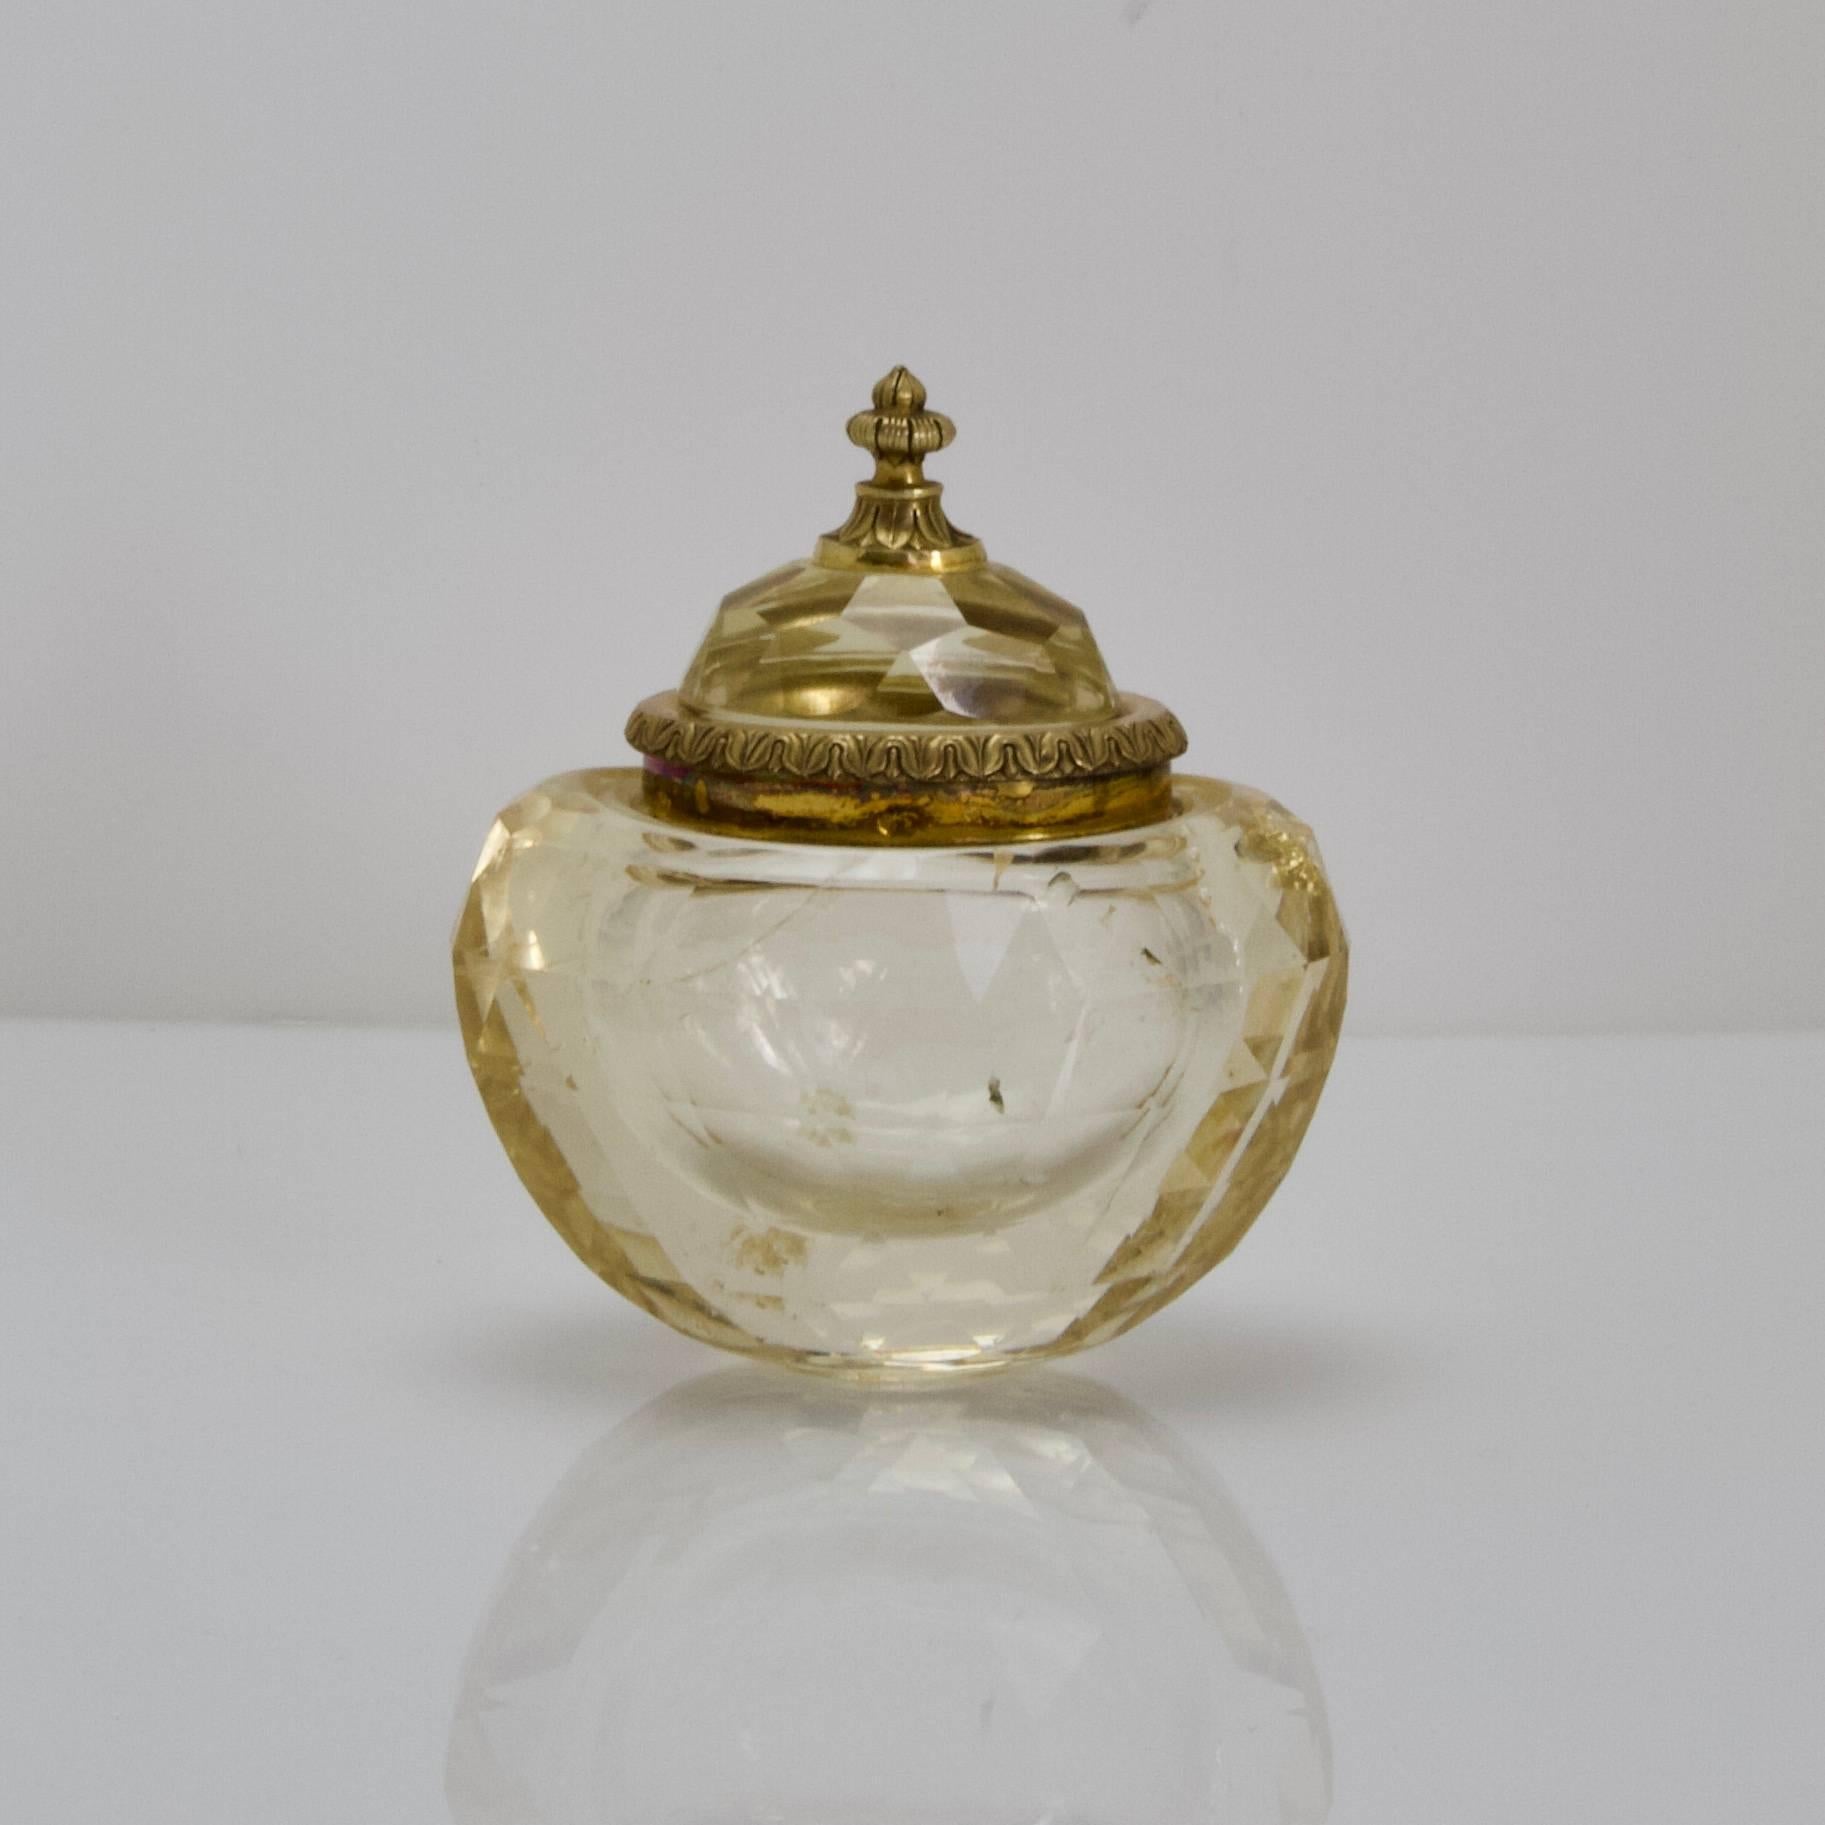 Hand-Crafted Antique Rare Citrine and Vermeil Perfume Bottle Made in Paris, circa 1810 For Sale